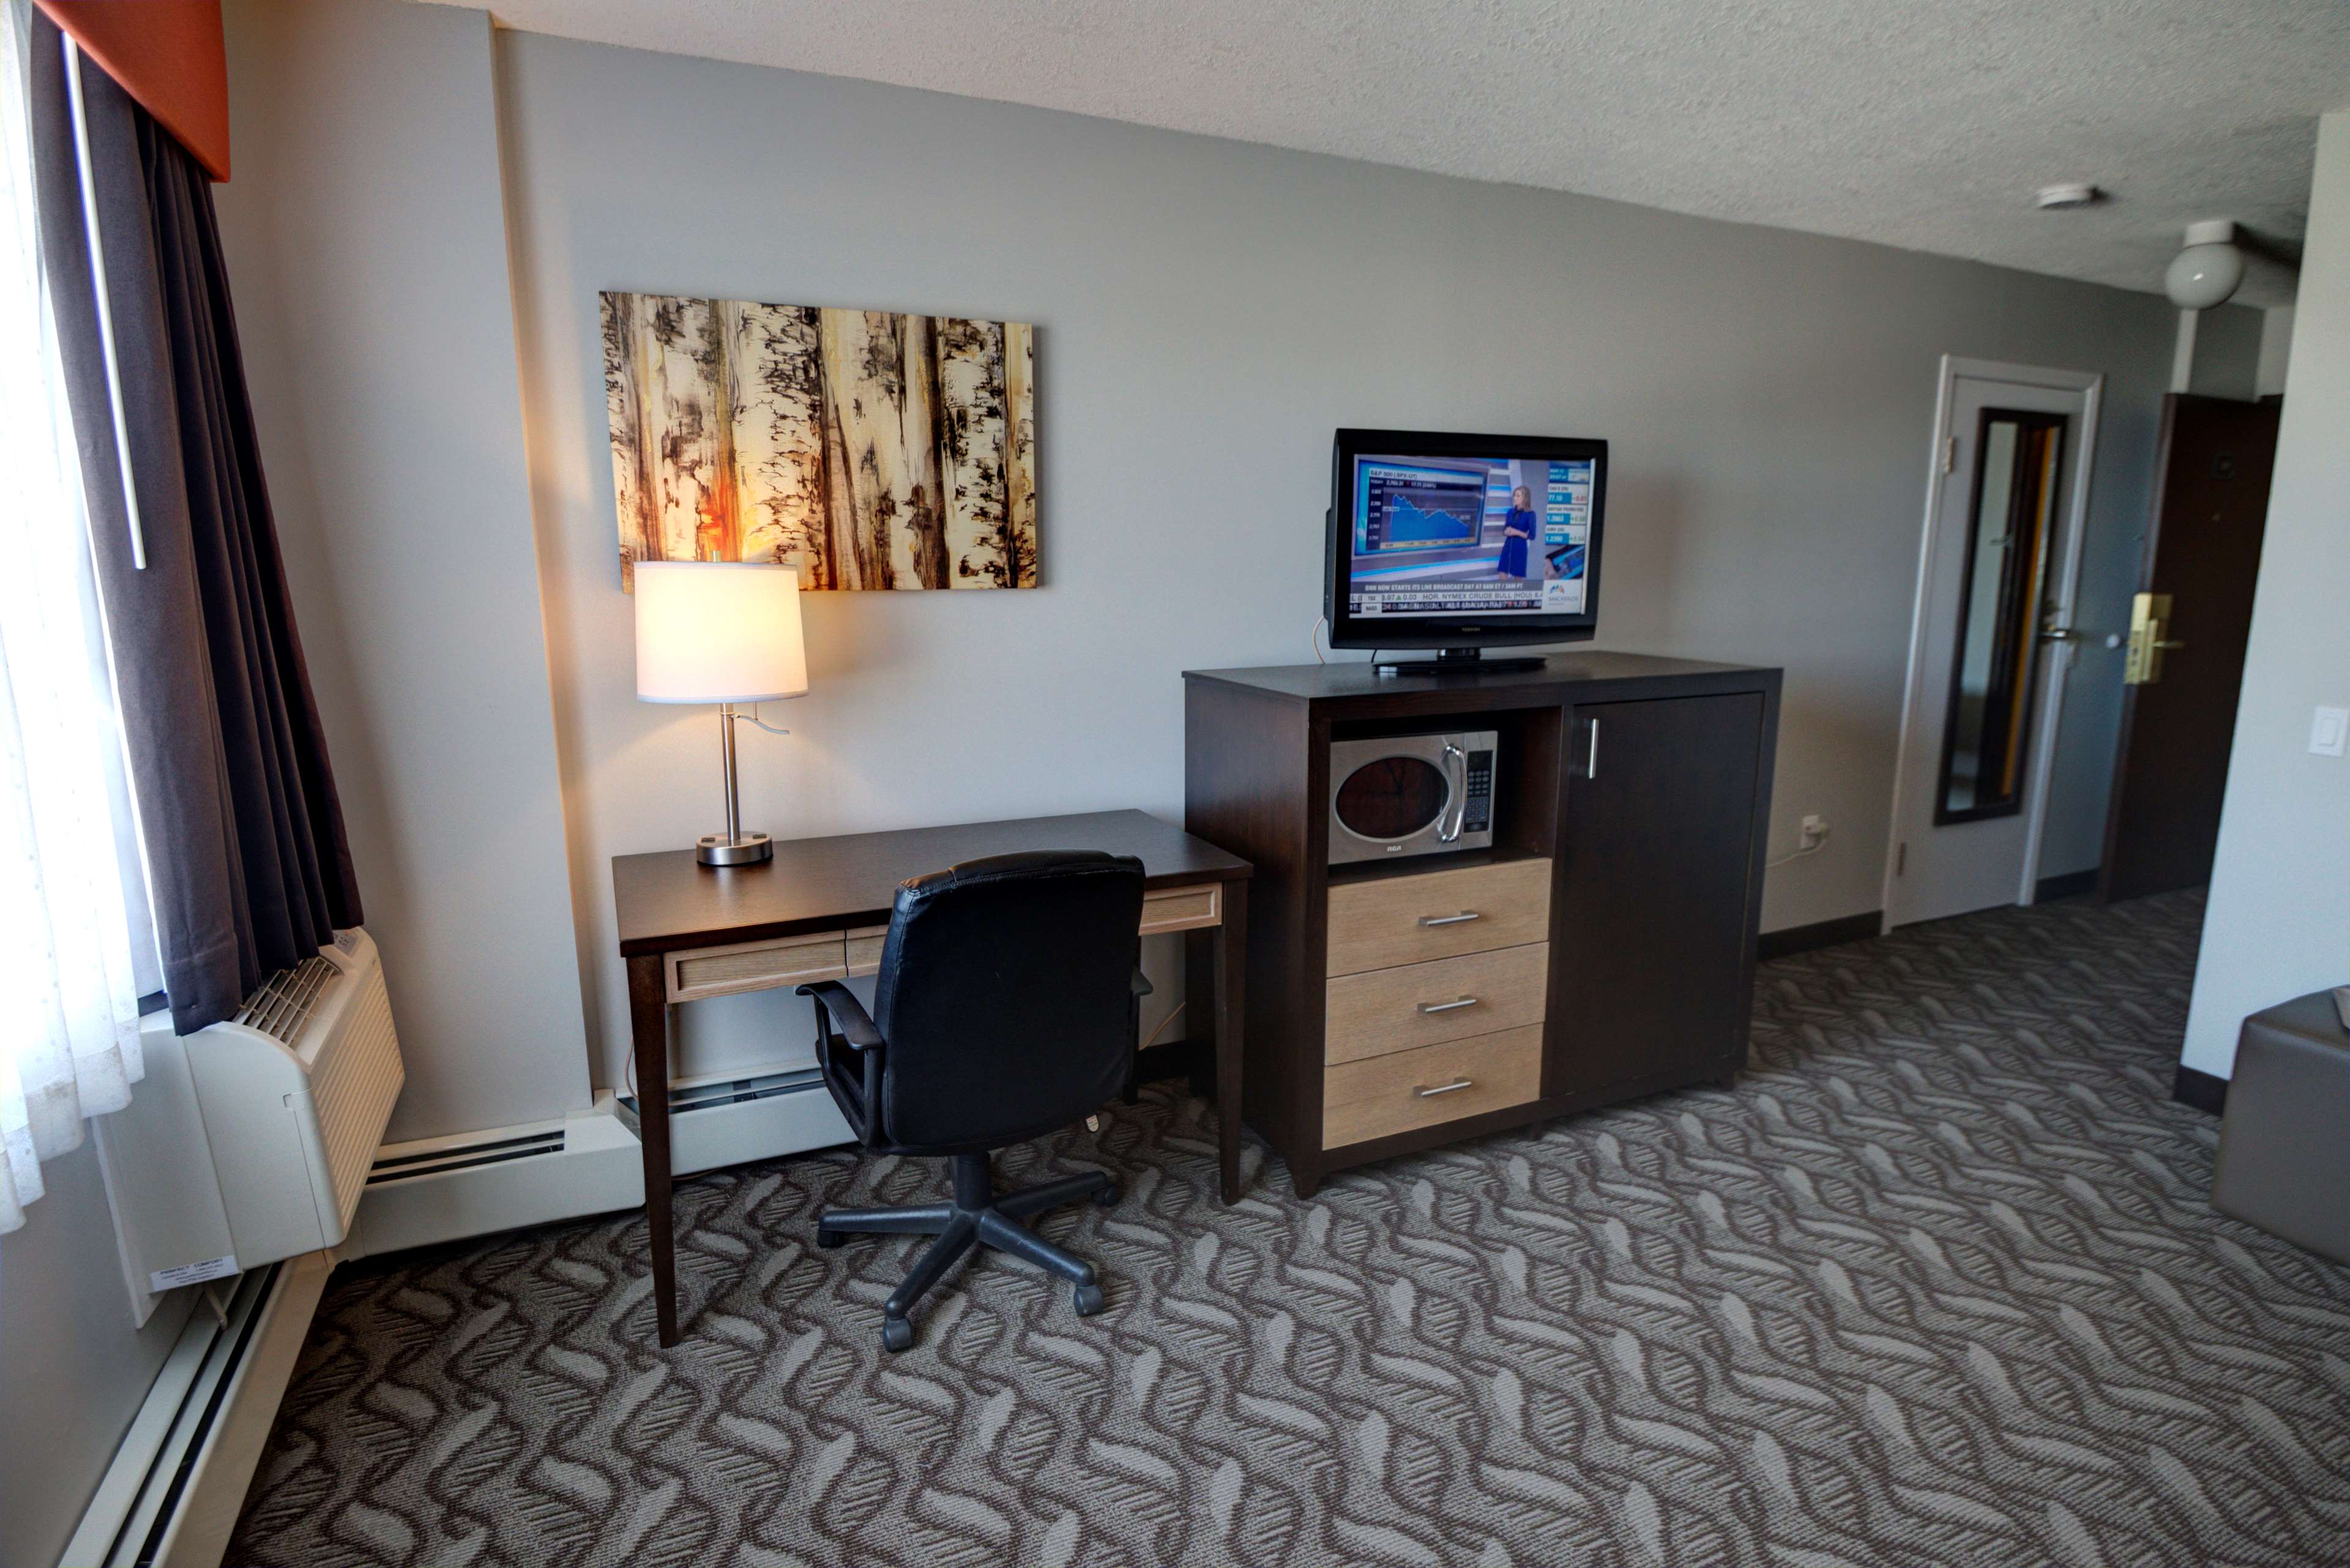 Best Western Airdrie in Airdrie: Adjoining rooms are available on request.